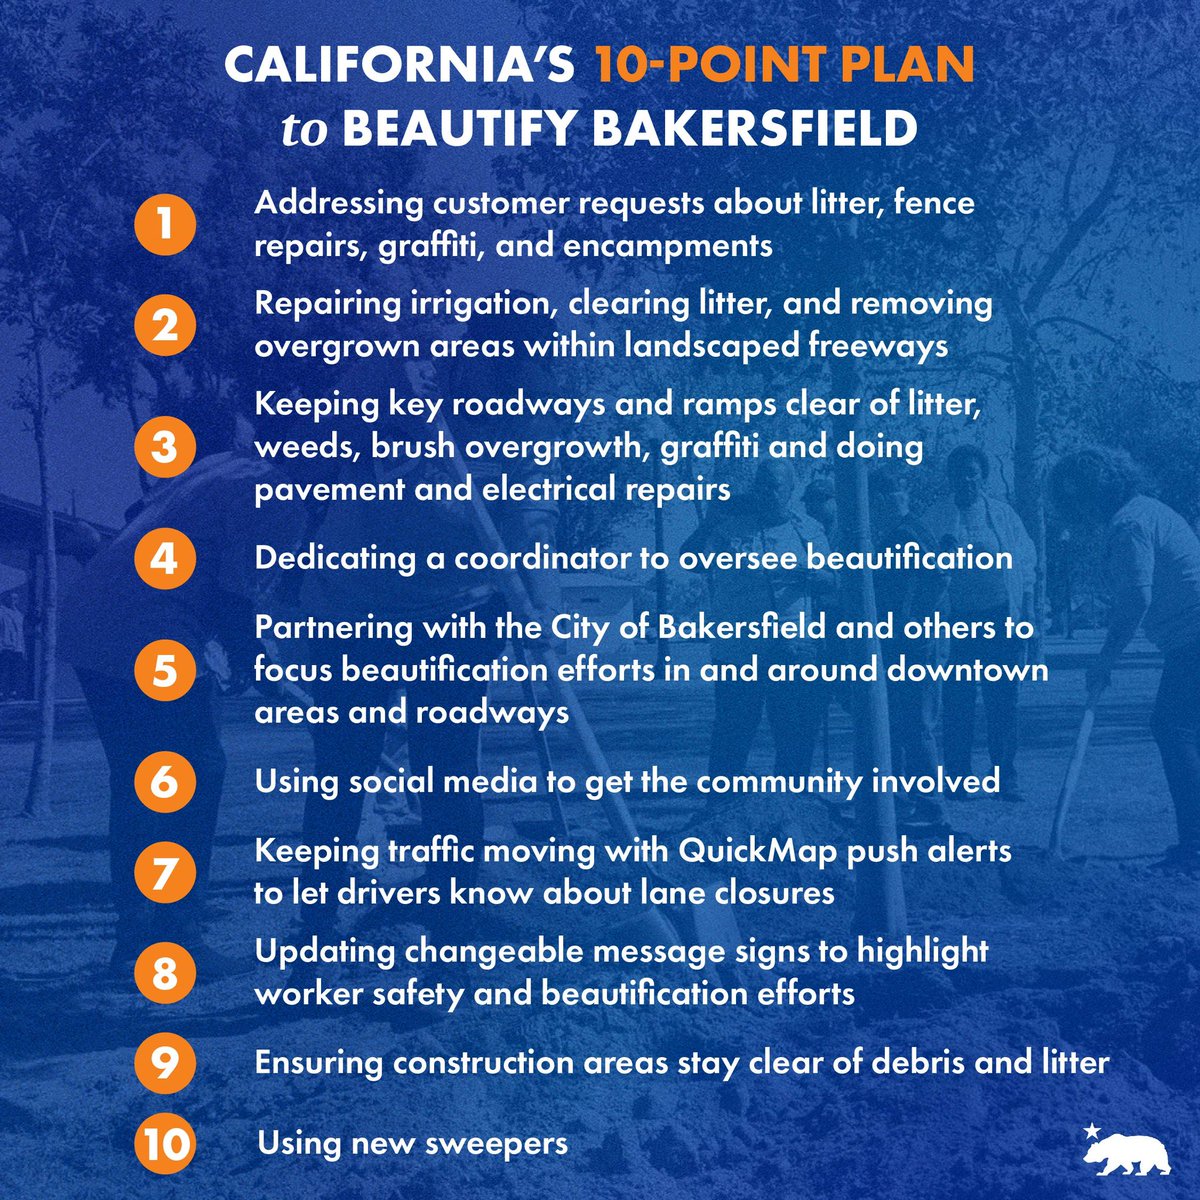 We’re supporting Bakersfield and the surrounding region to improve street safety and enrich public spaces. Working together with our local partners, the state is releasing a 10-Point Plan to Beautify Bakersfield — making our communities safer and cleaner.